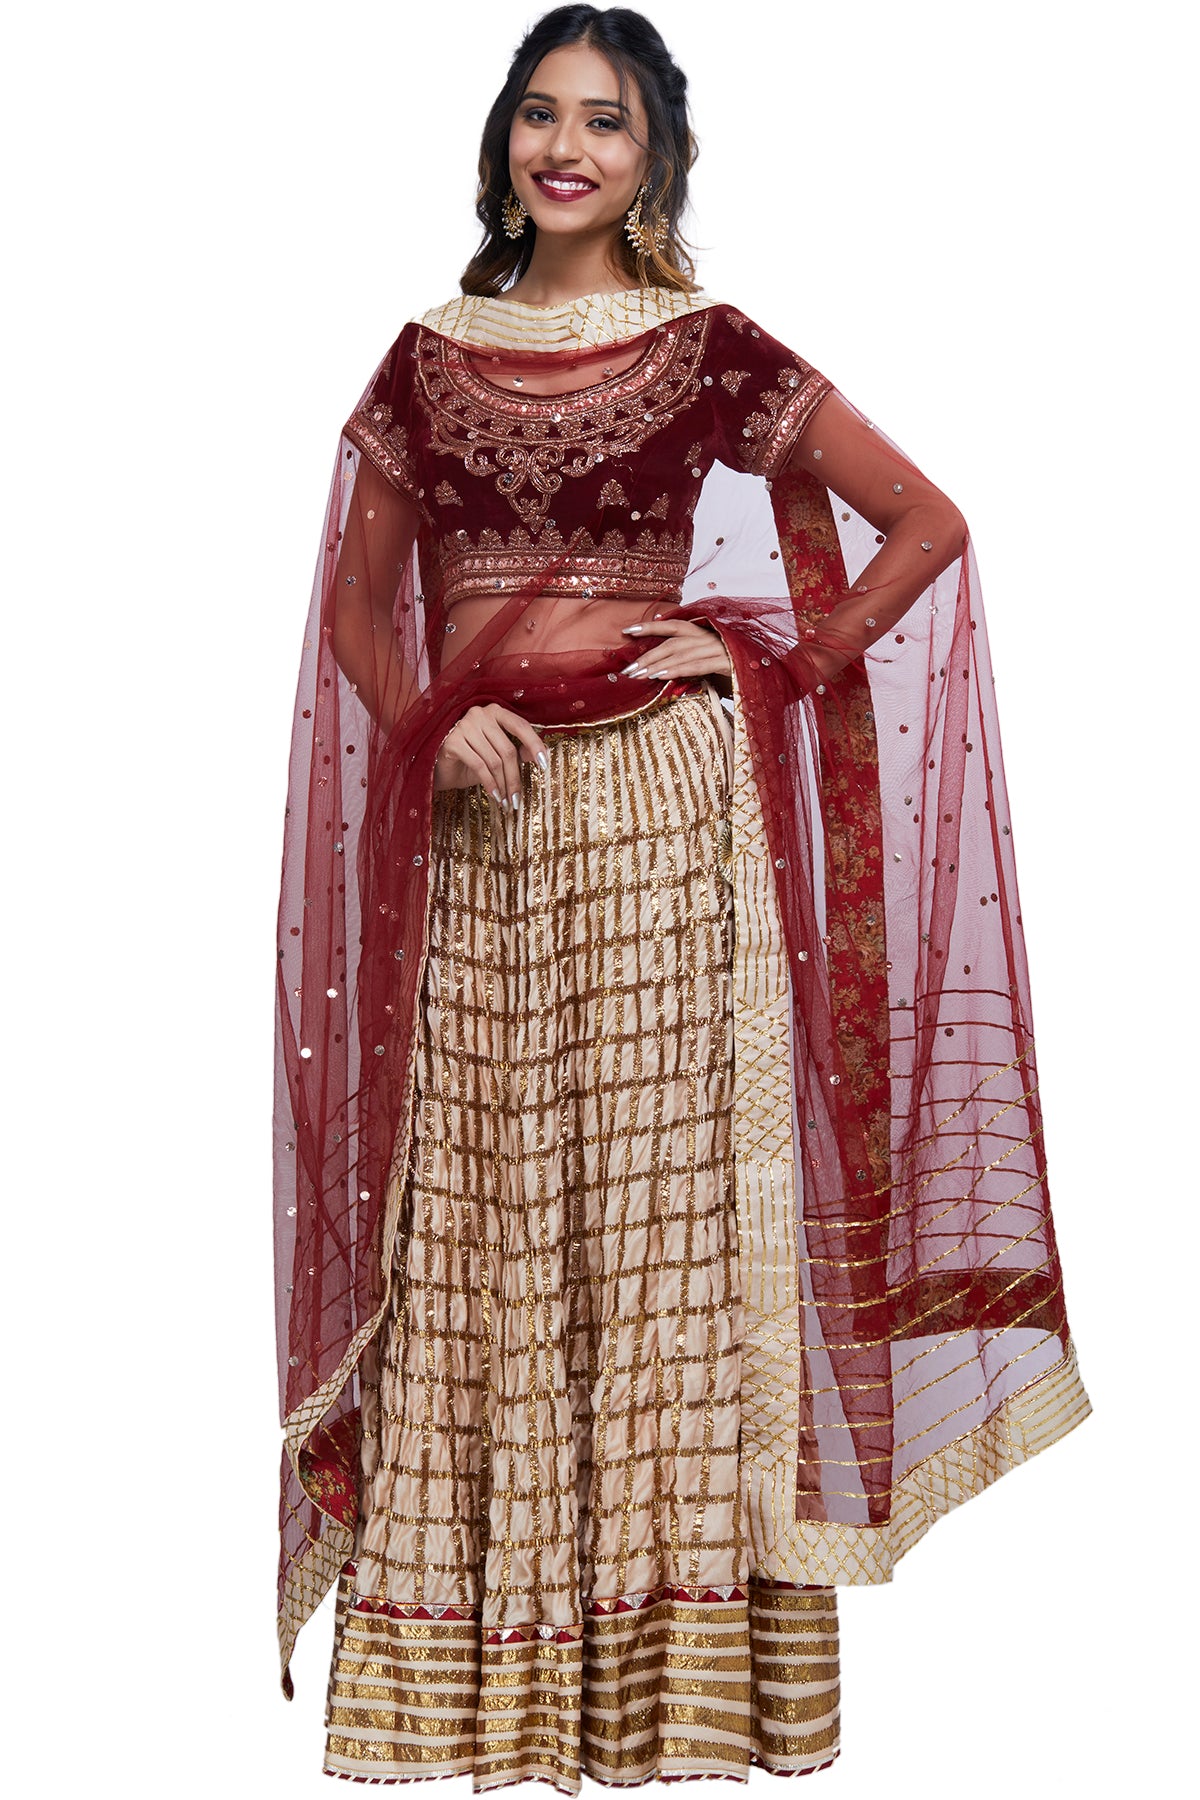 It's your big day and here's all you need to slay. Get your hands on this outfit with its maroon velvet blouse embroidered in zardosi and baadla work over a cream lehenga embroidered in geometric patterns finished with Hyderabadi gota.